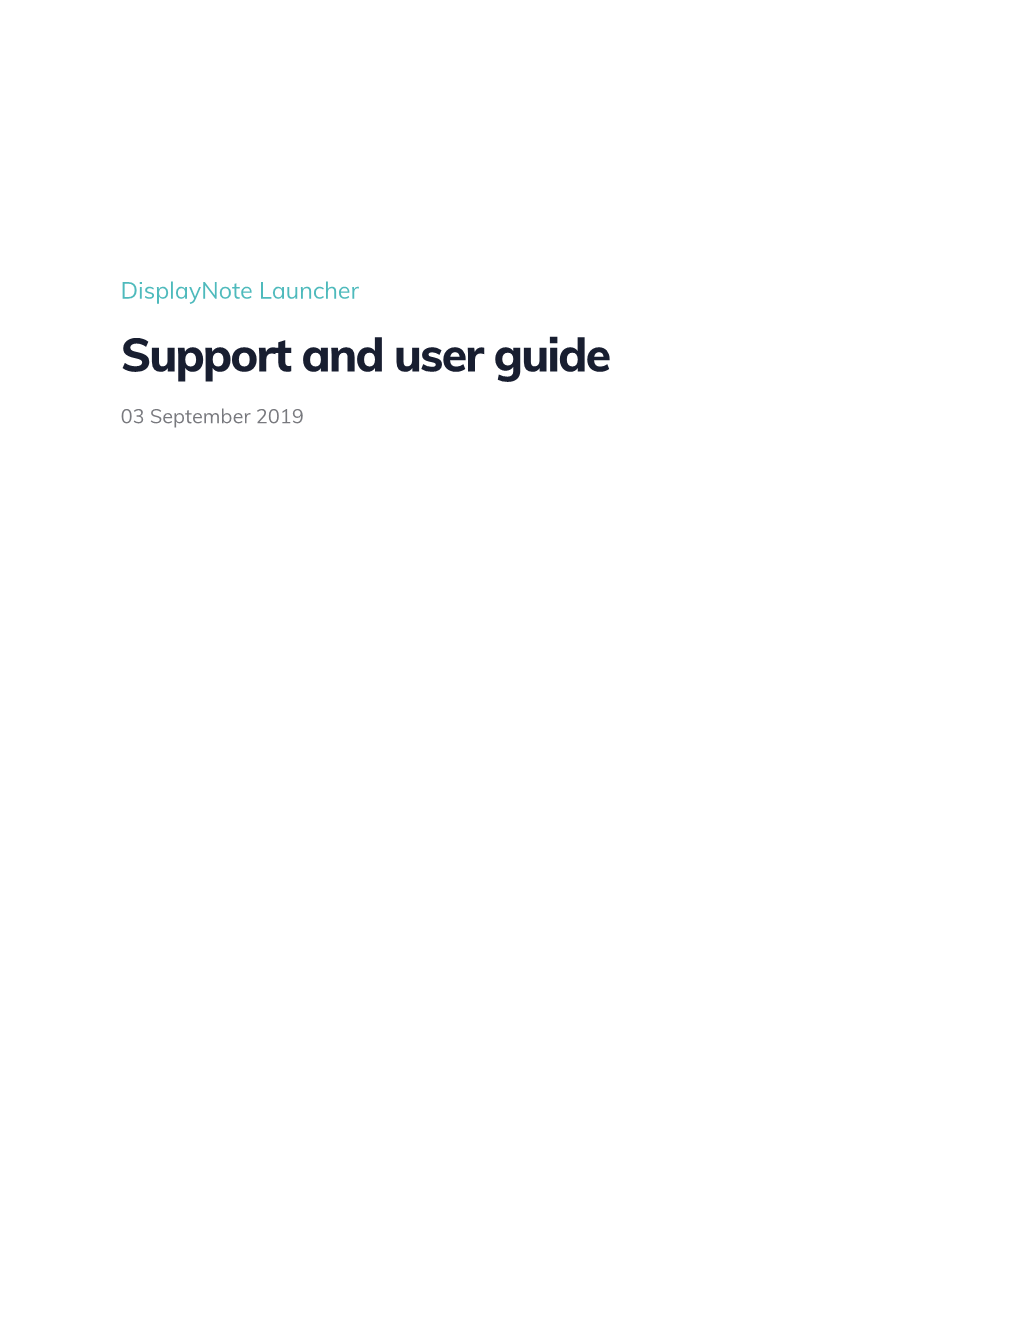 Support and User Guide